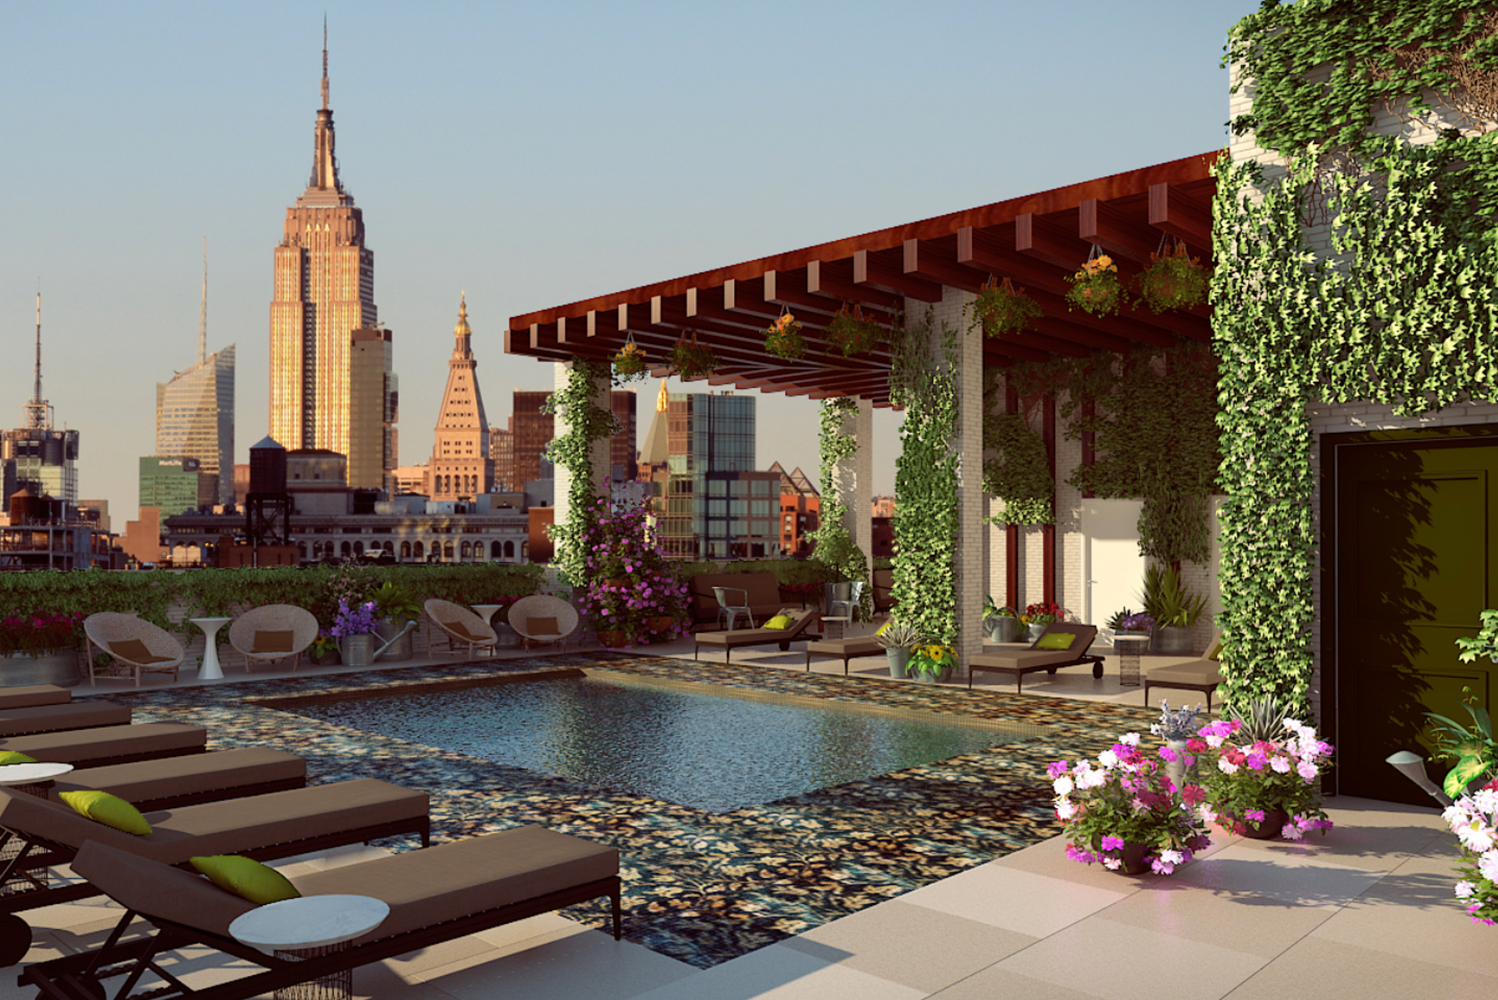 Renaissance New York Chelsea Hotel is scheduled to open a new restaurant this Fall 2019 